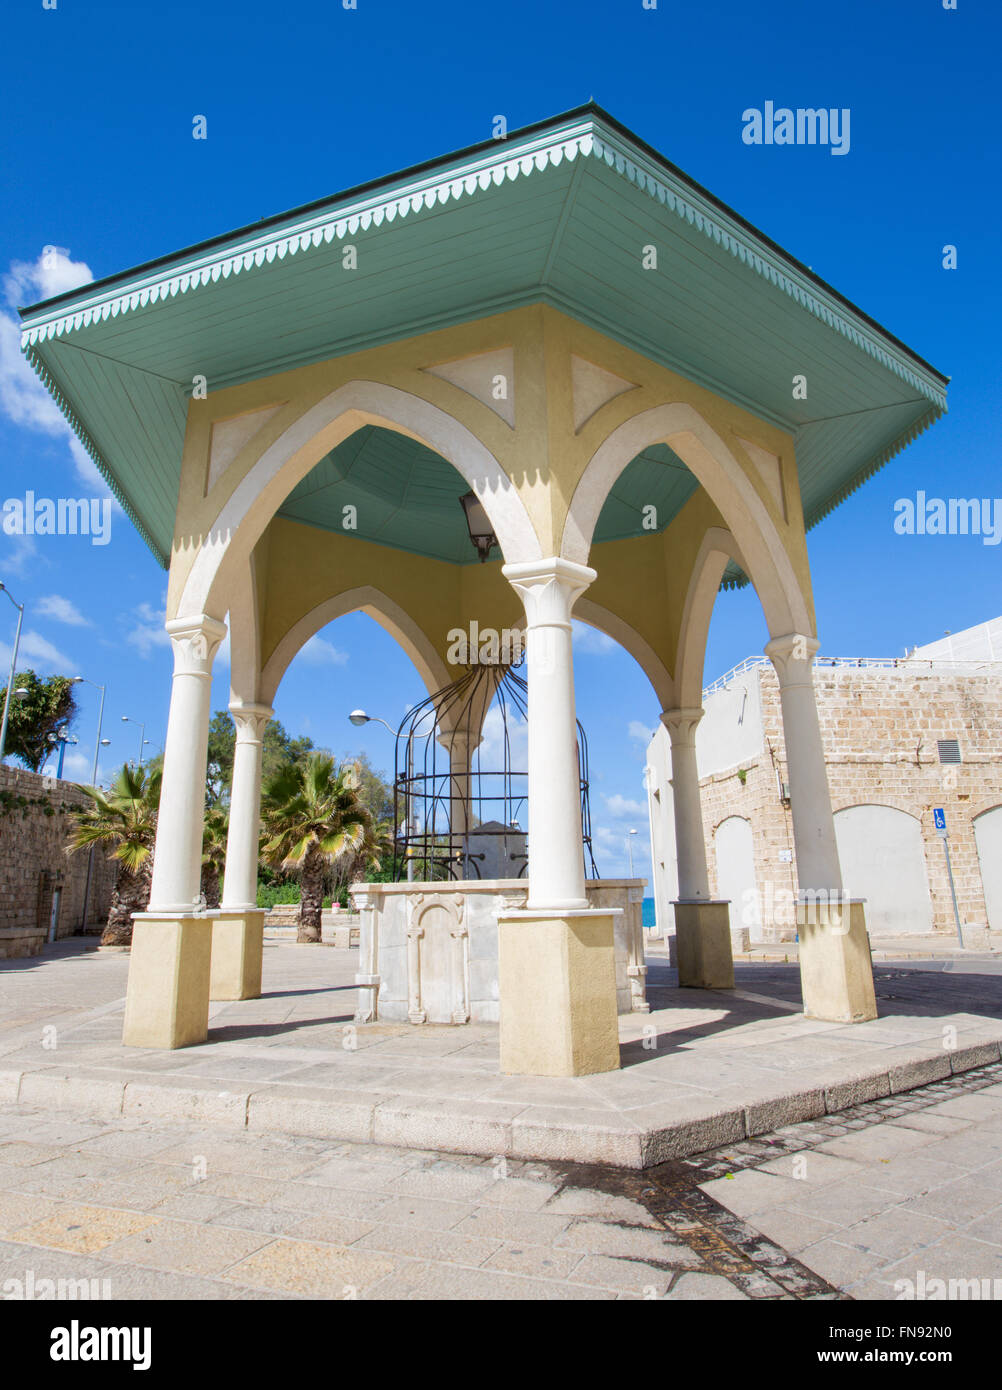 Tel Aviv - The stone well in old Jaffa Stock Photo